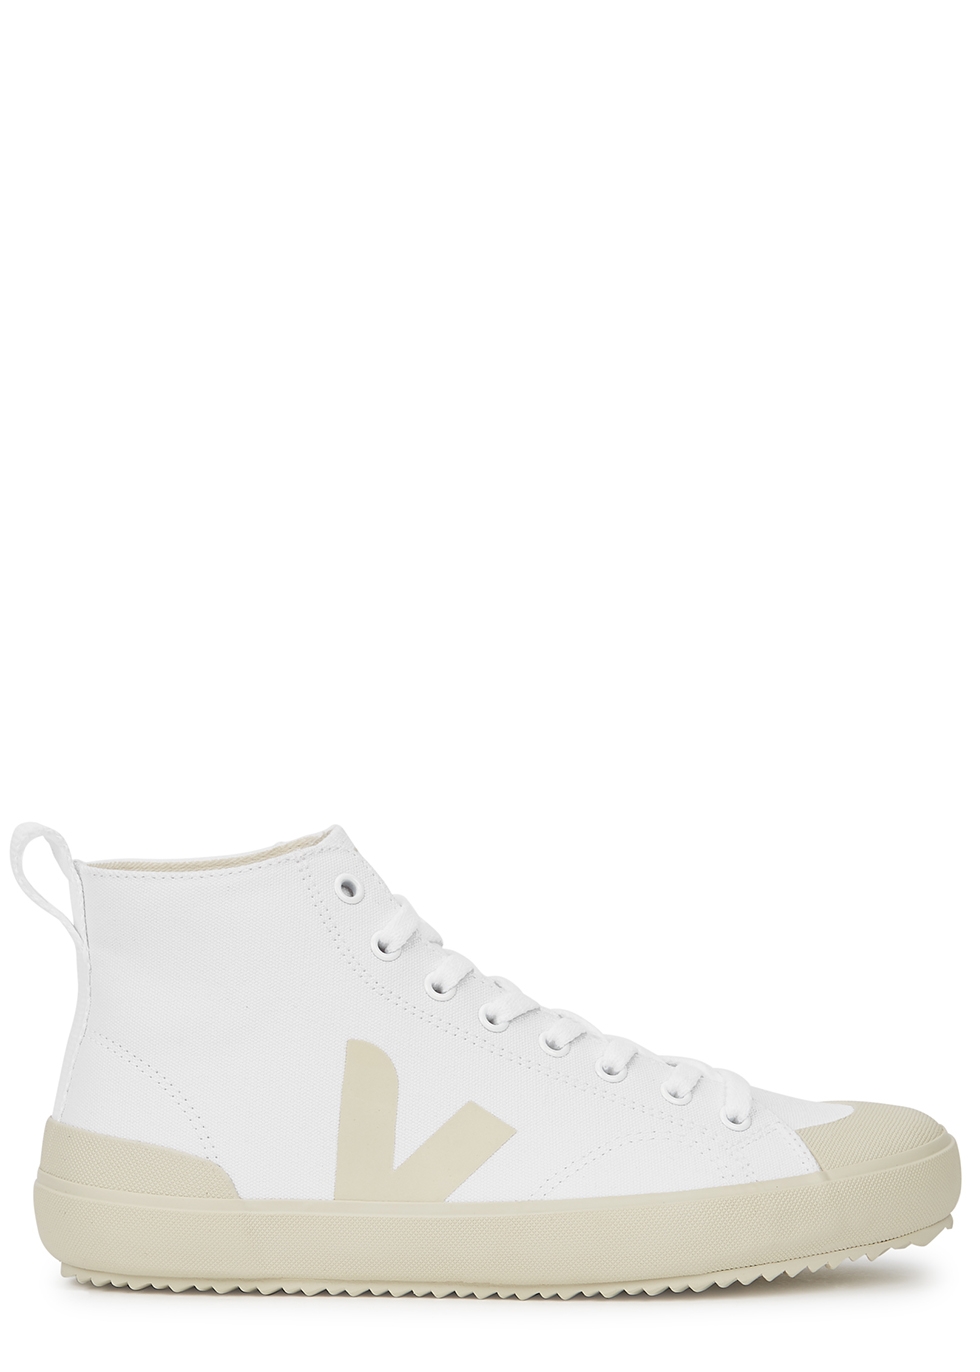 white canvas high top shoes